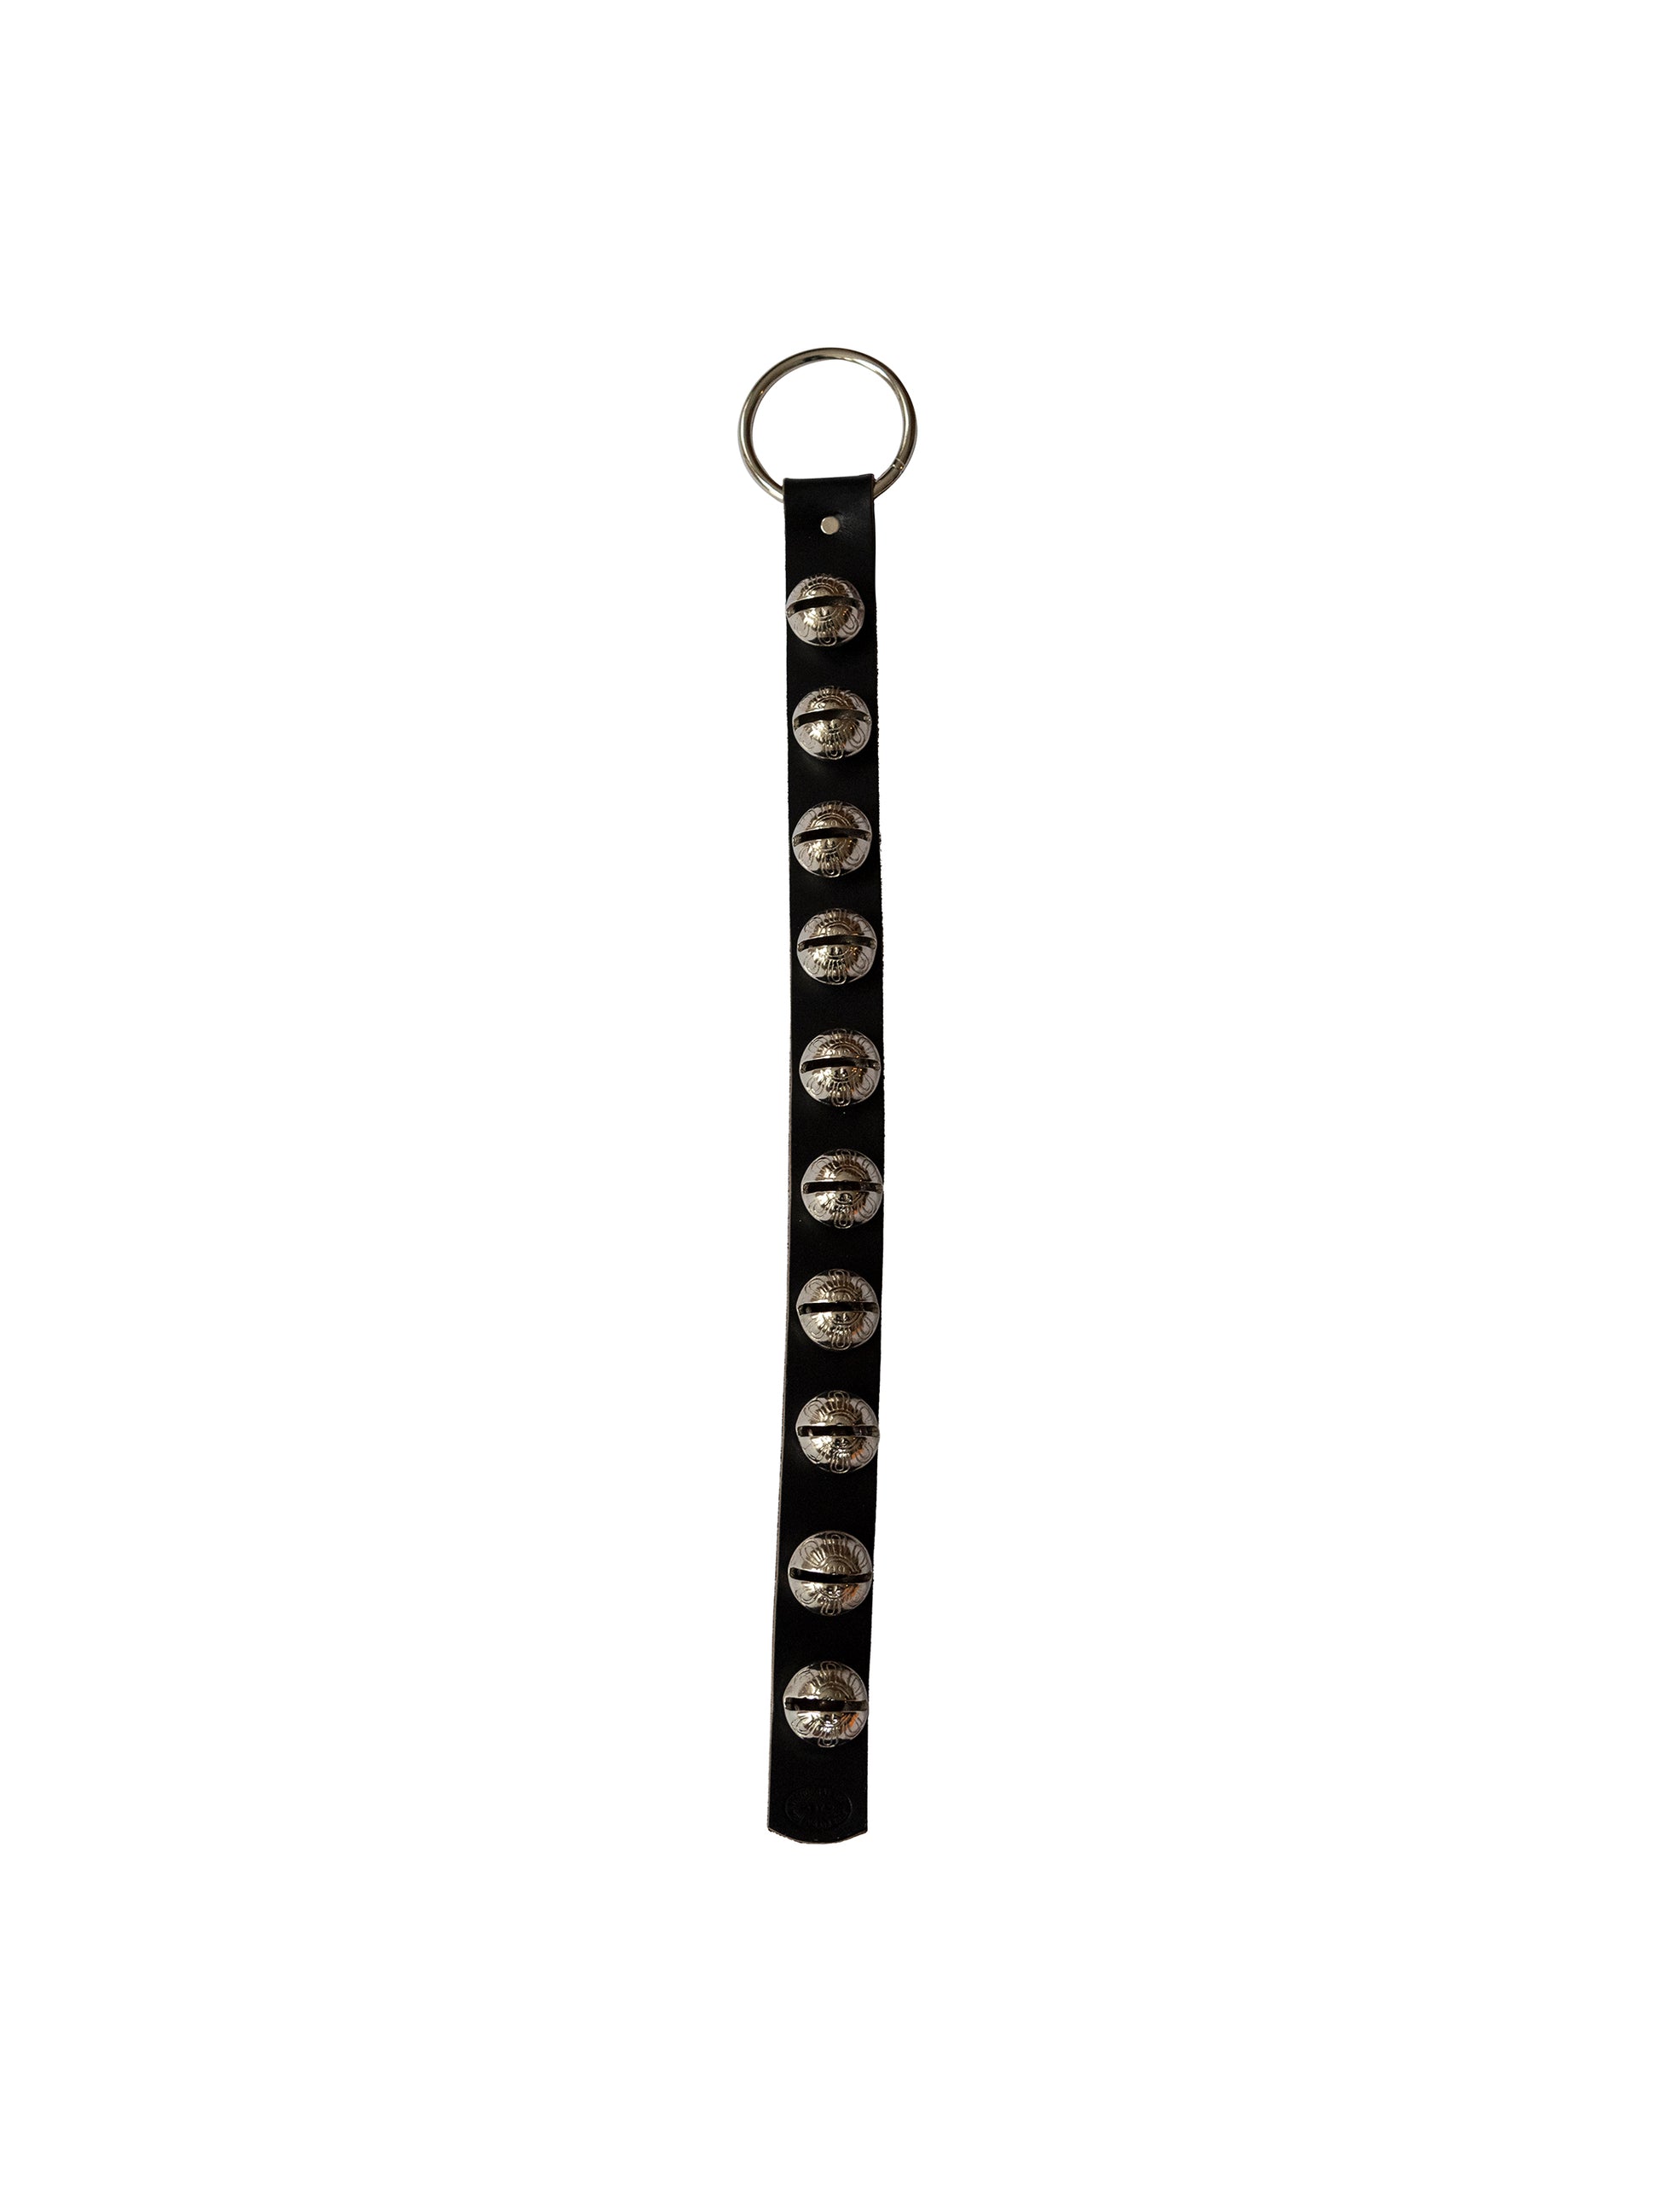 New England Bells Traditional Strap Collection Silver Bells Black Strap Weston Table